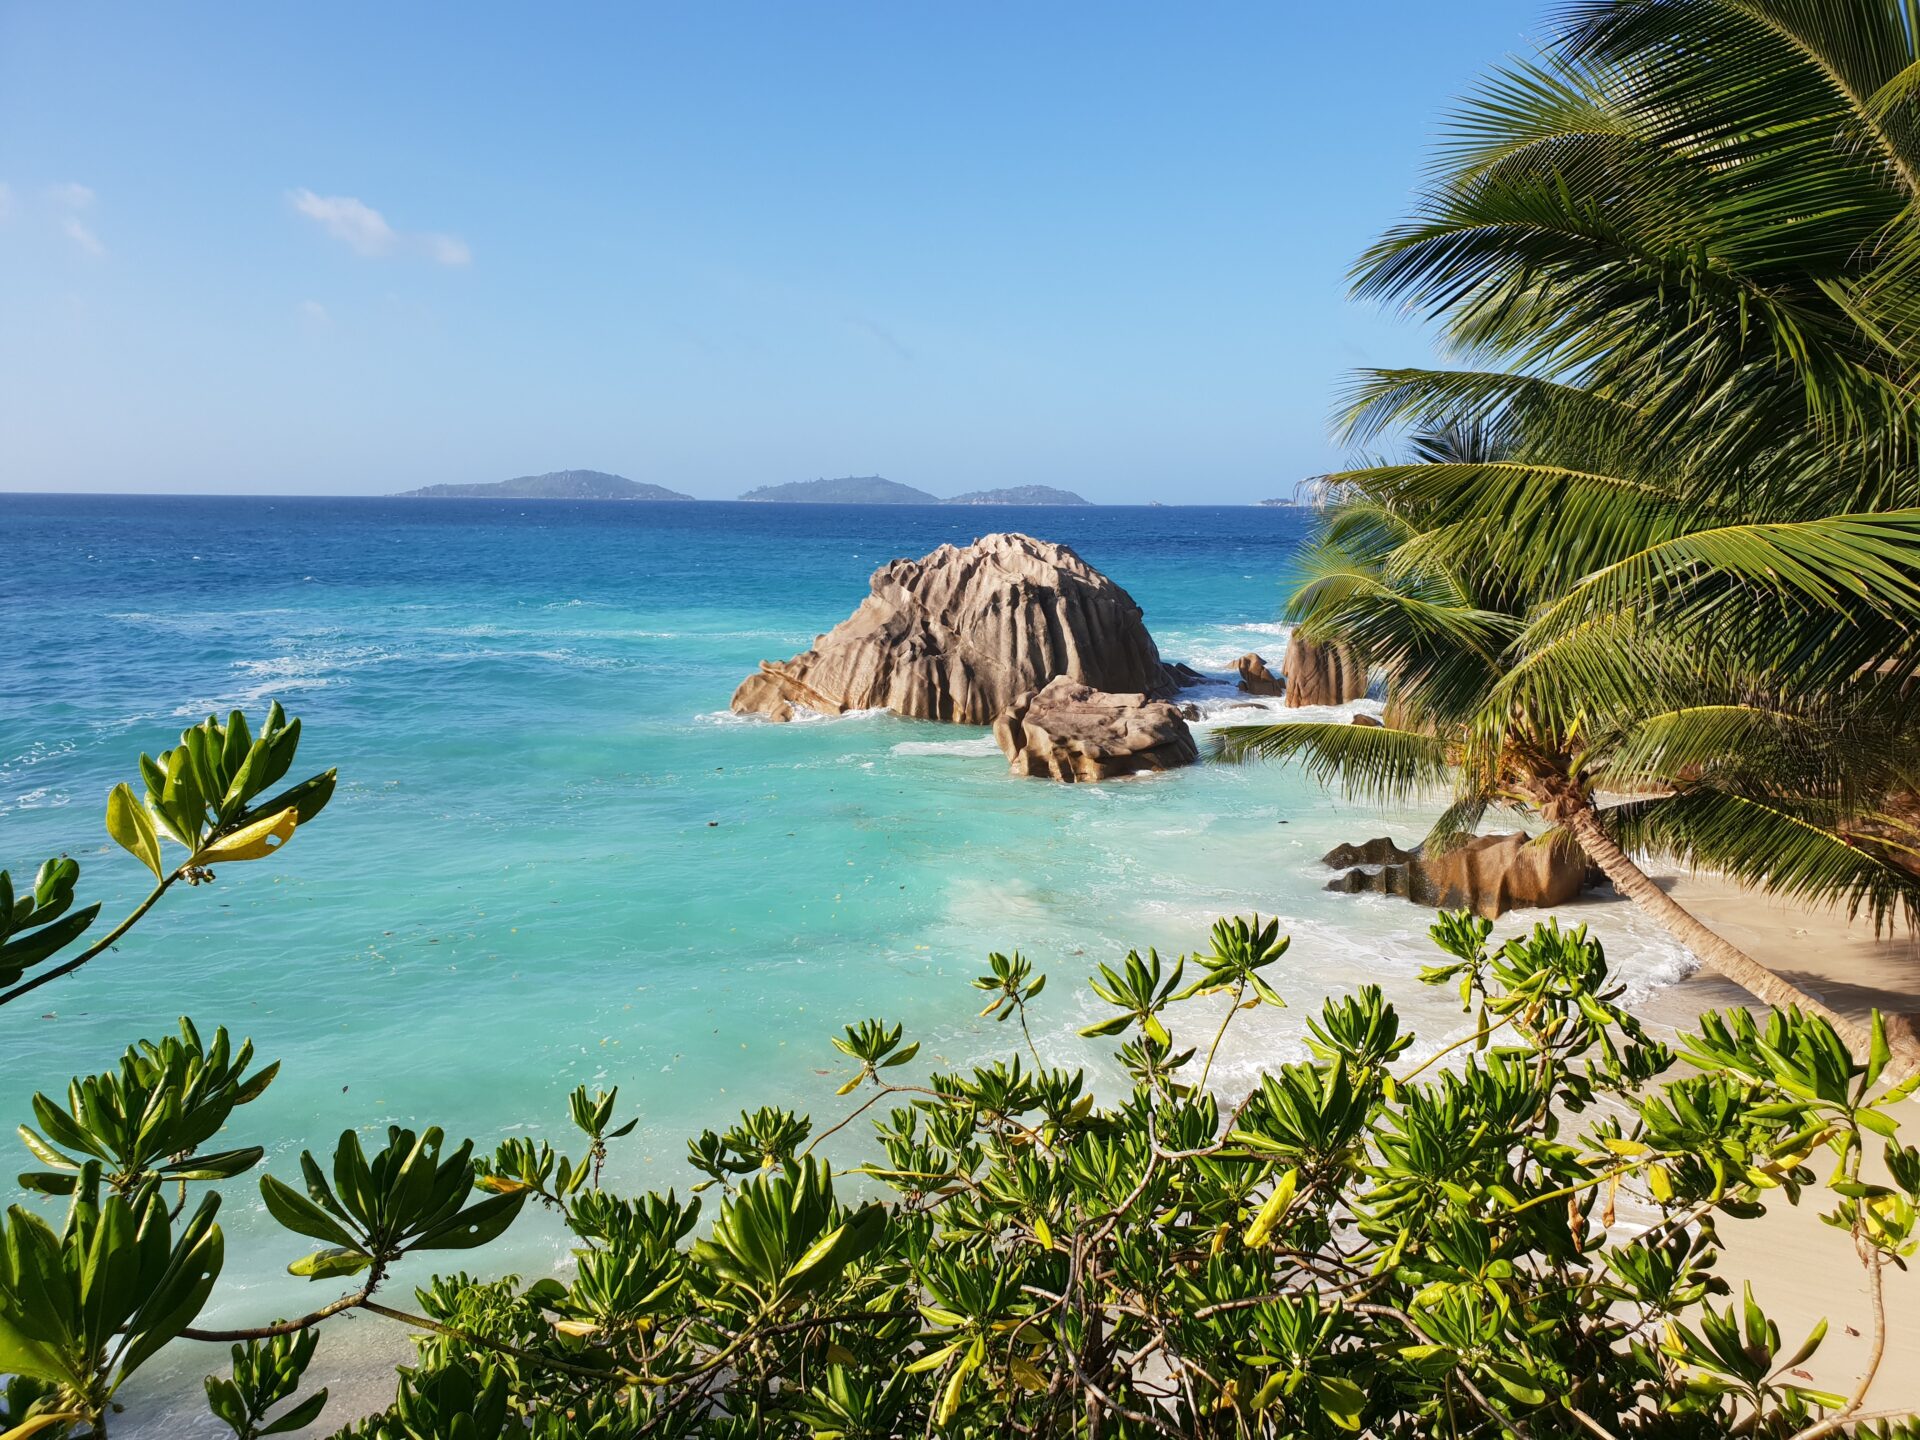 A rocky beach with crystal blue water on the Seychelles Island of La Digue